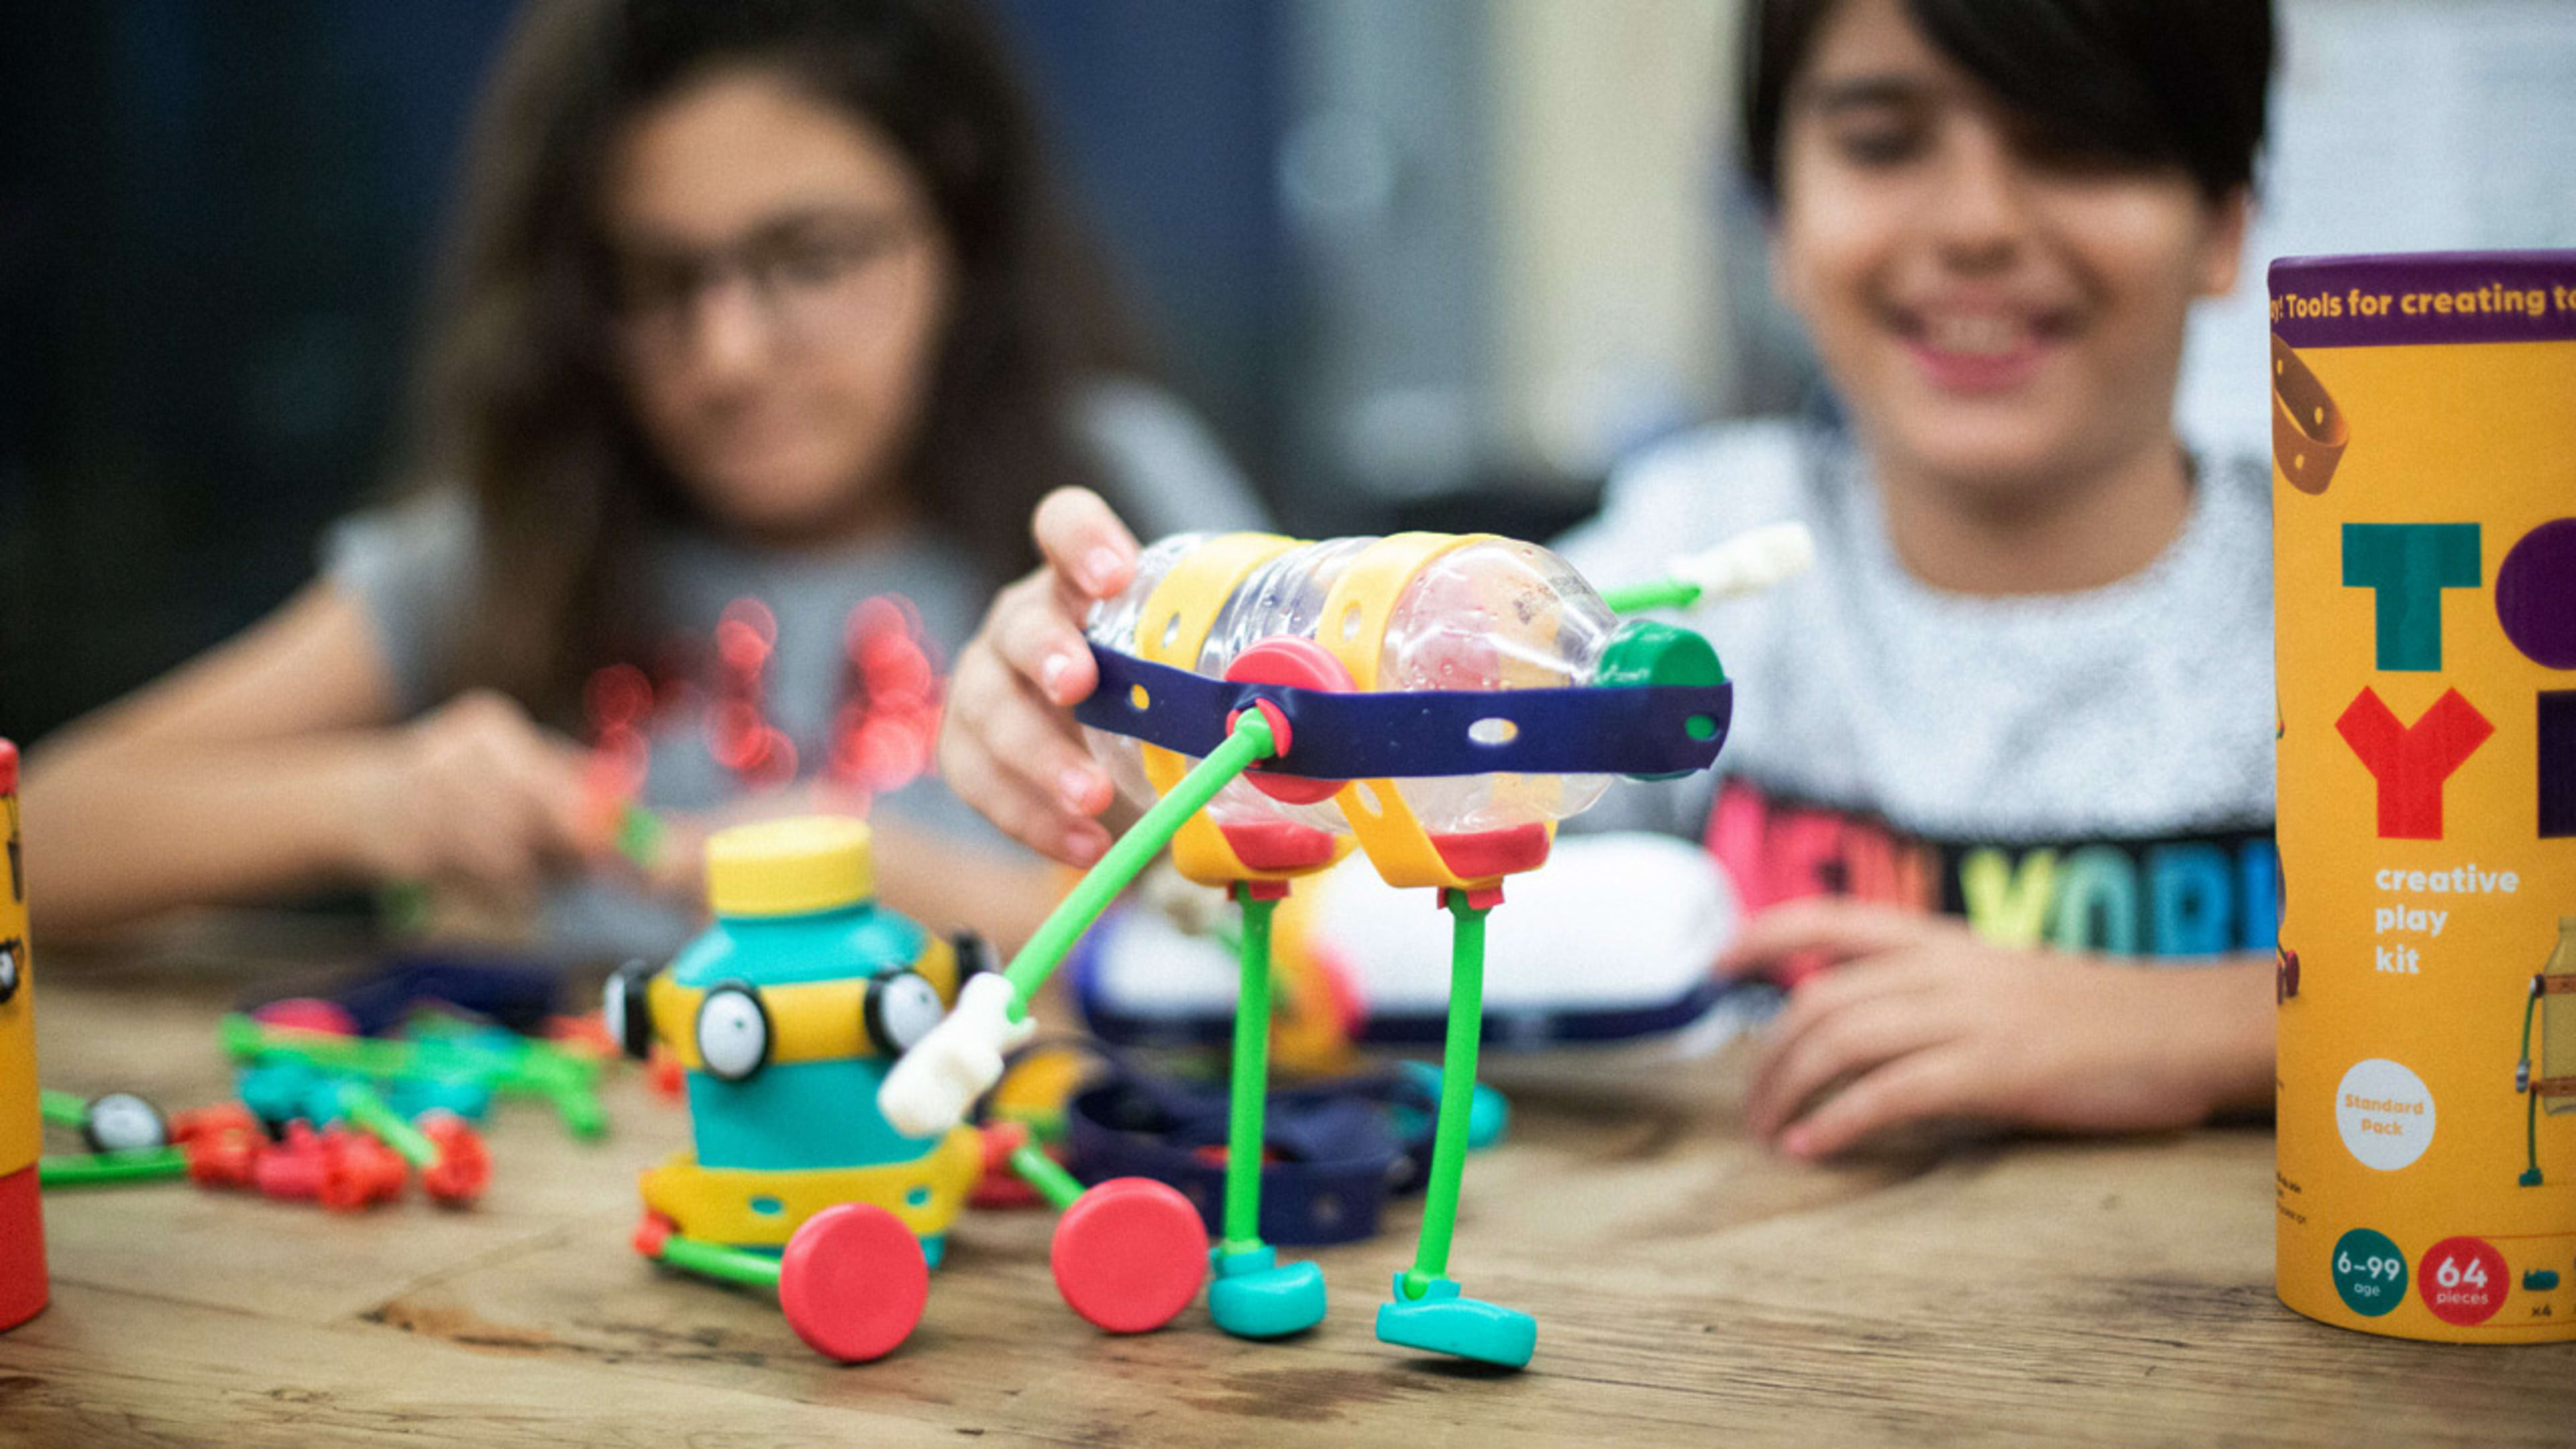 Turn trash into toys with this maker kit for kids